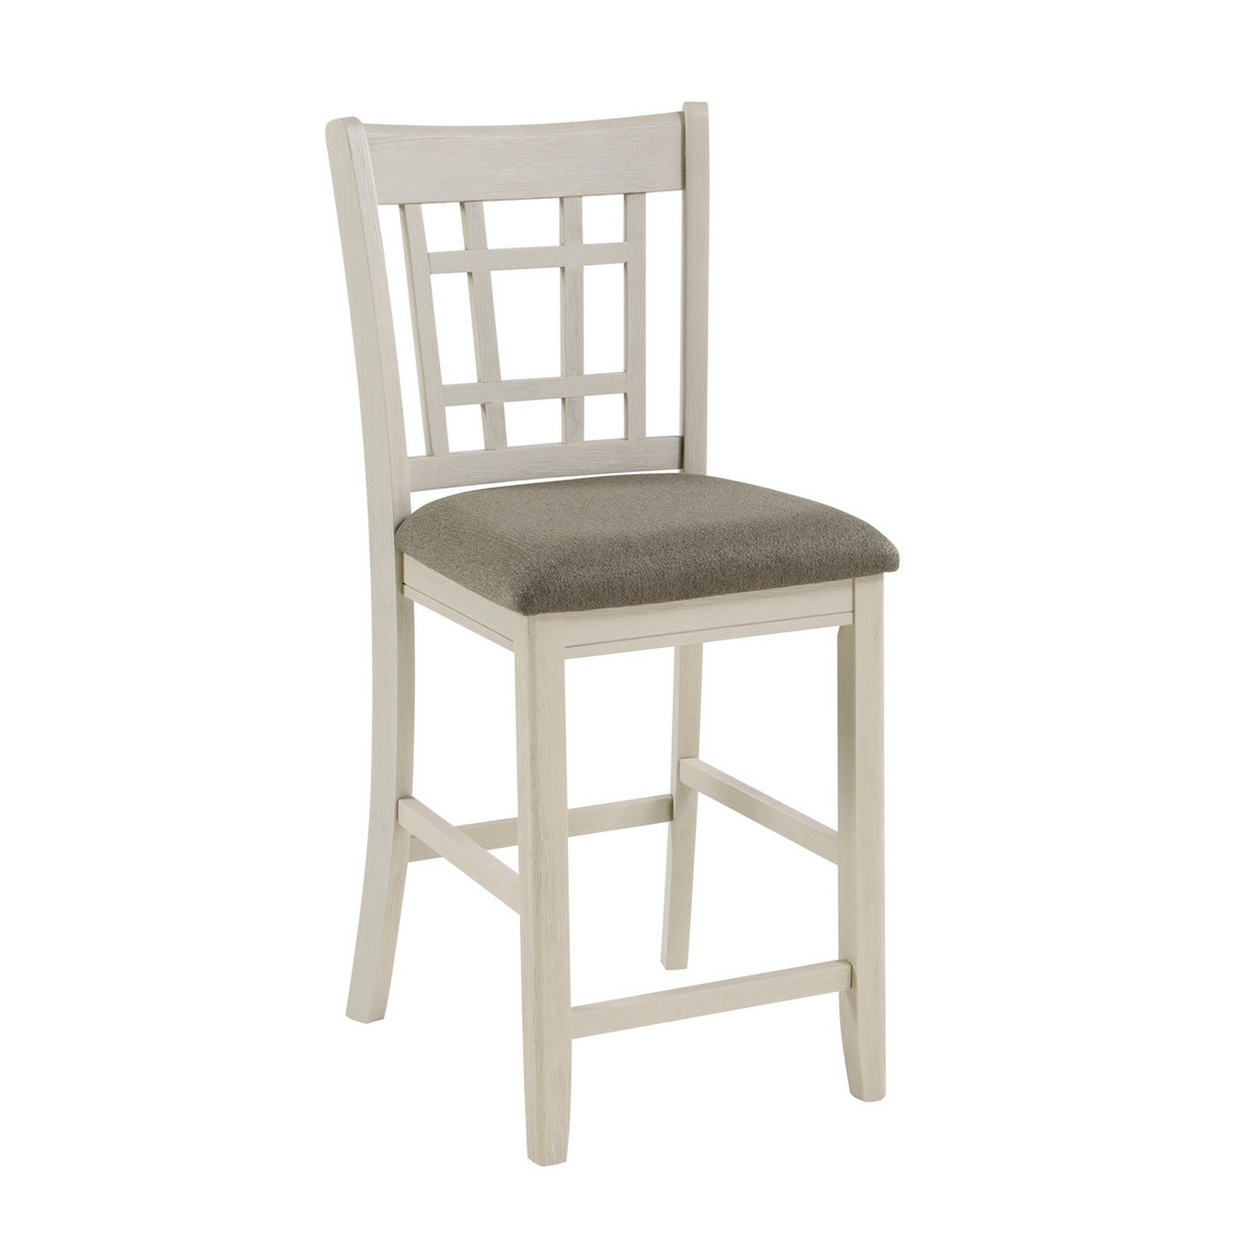 Glee 26 Inch Counter Height Chair, Set Of 2, Antique White And Brown Finish- Saltoro Sherpi